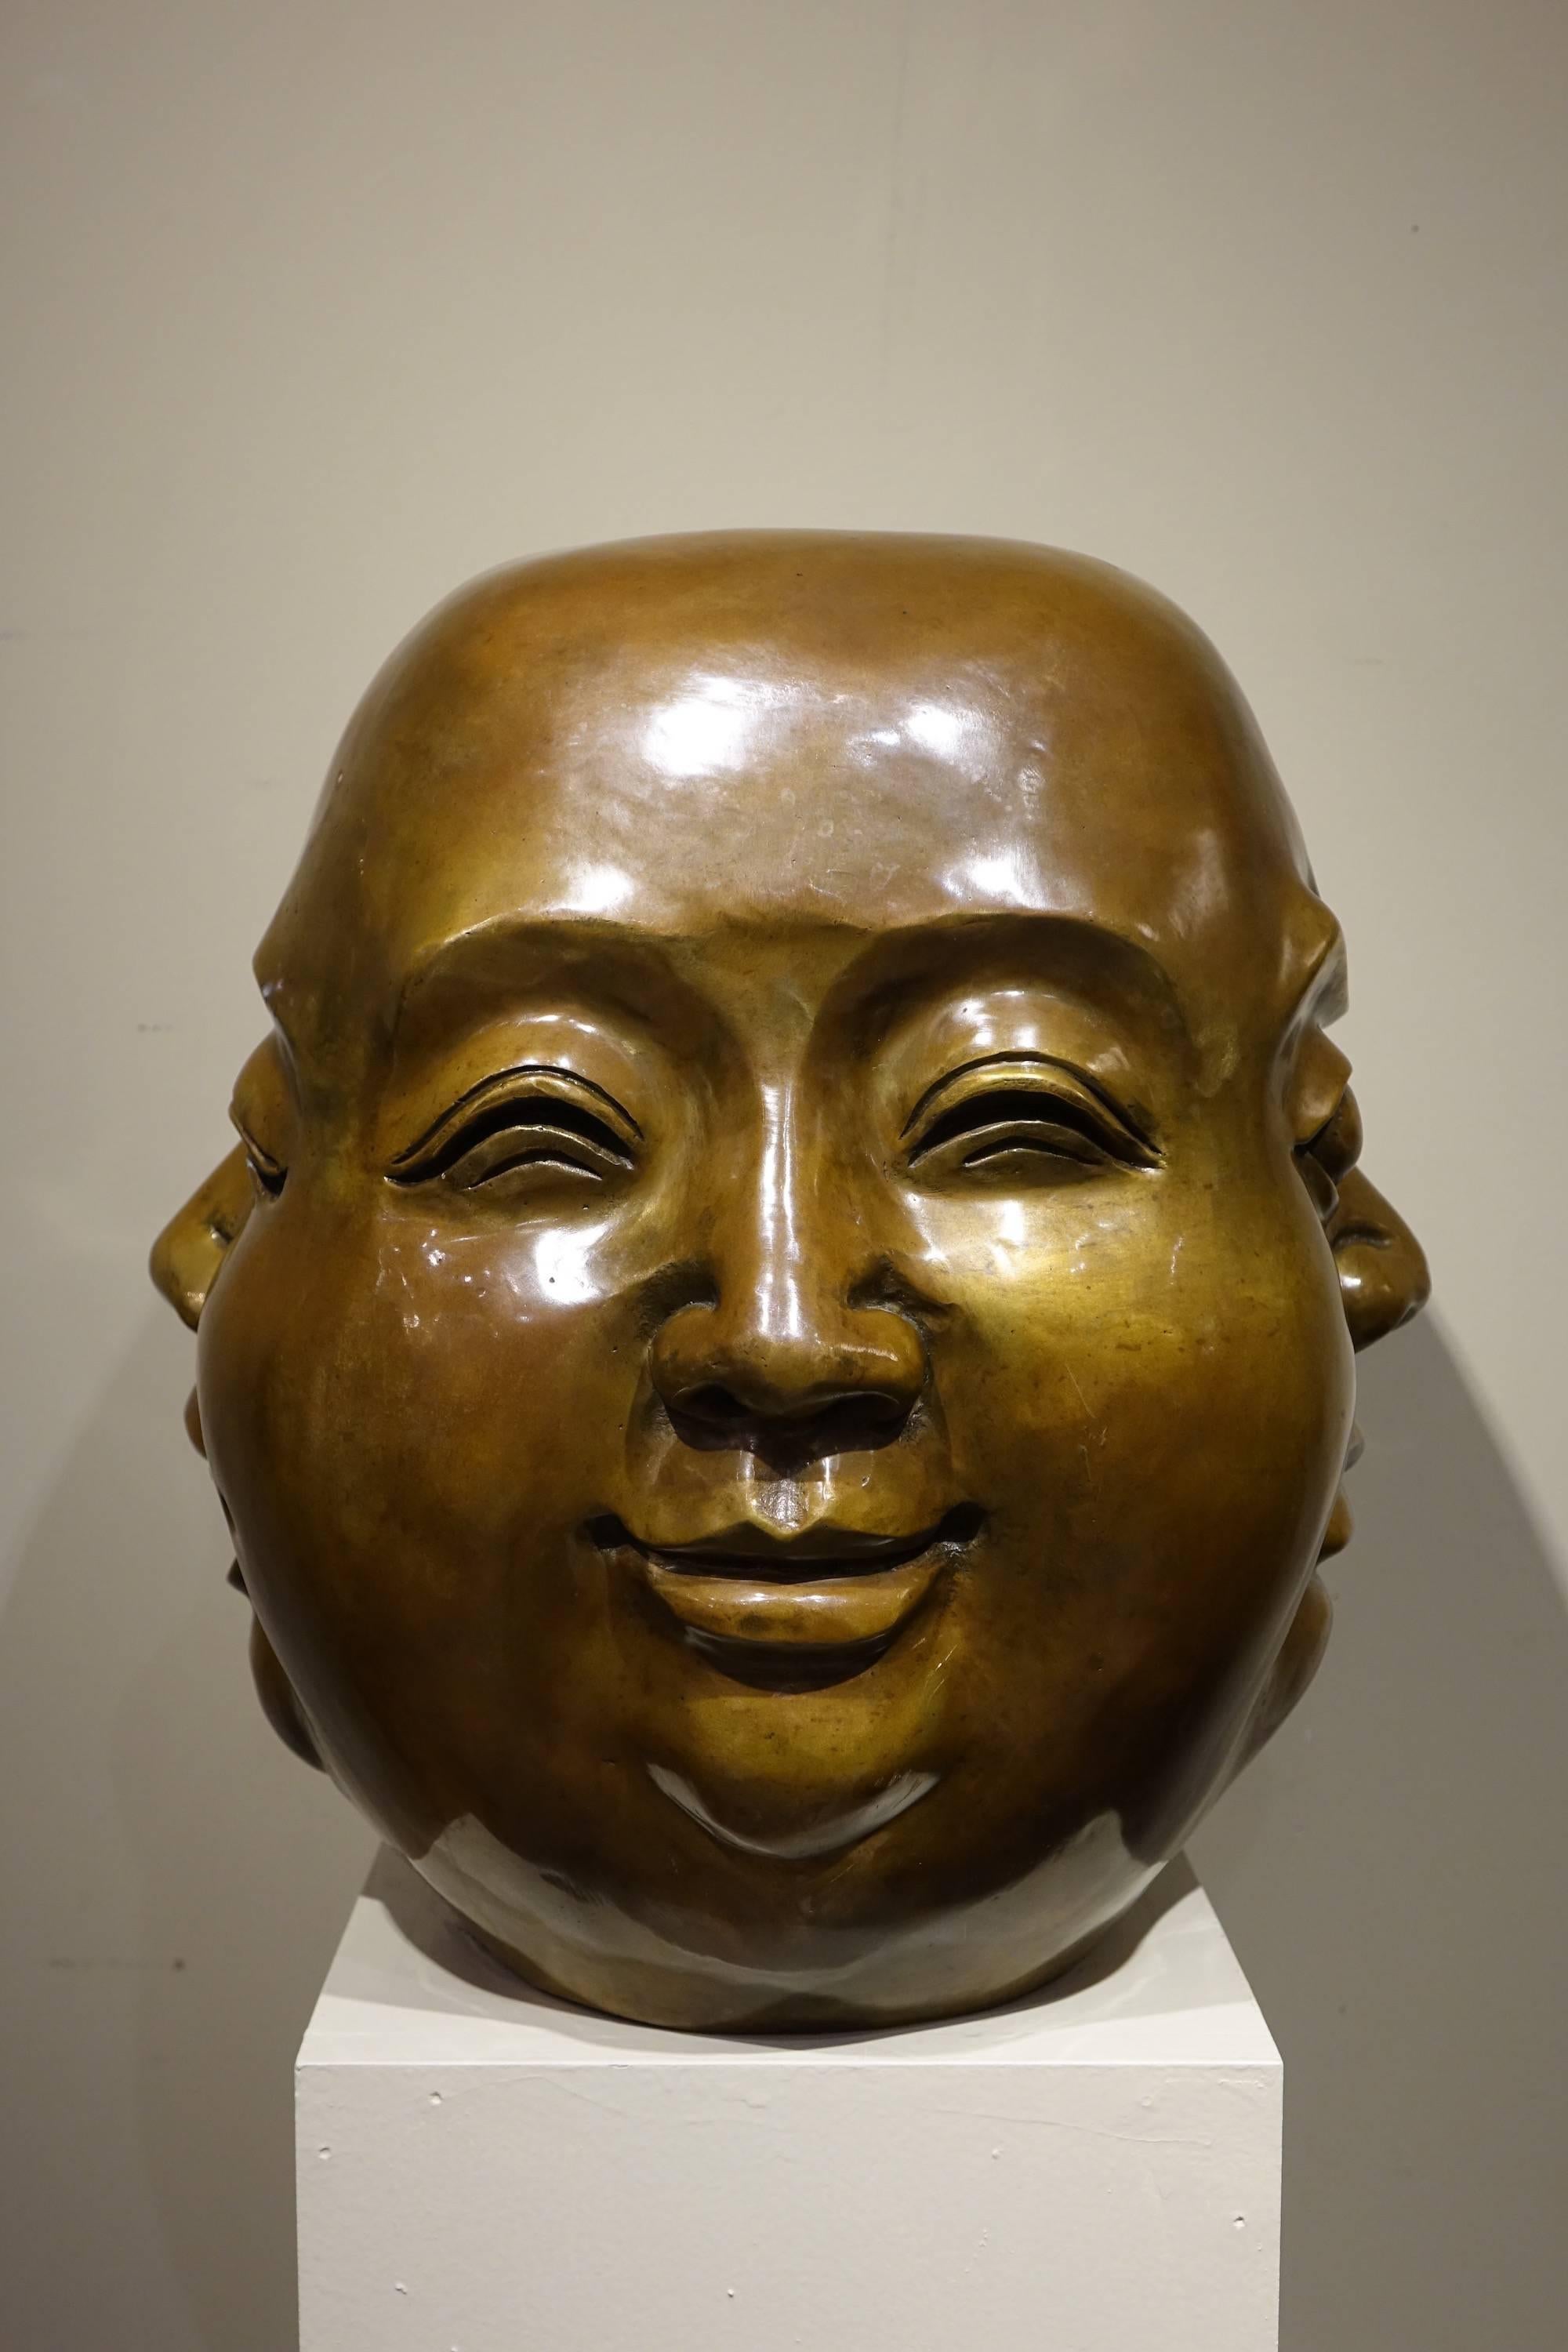 Chinese bronze, four-faced head, China, late 19th century
Four-faced head showing four traits of character: fear, pleasure, anger, joy.
Cartridge on the bottom describing them below
China, late 19th century.